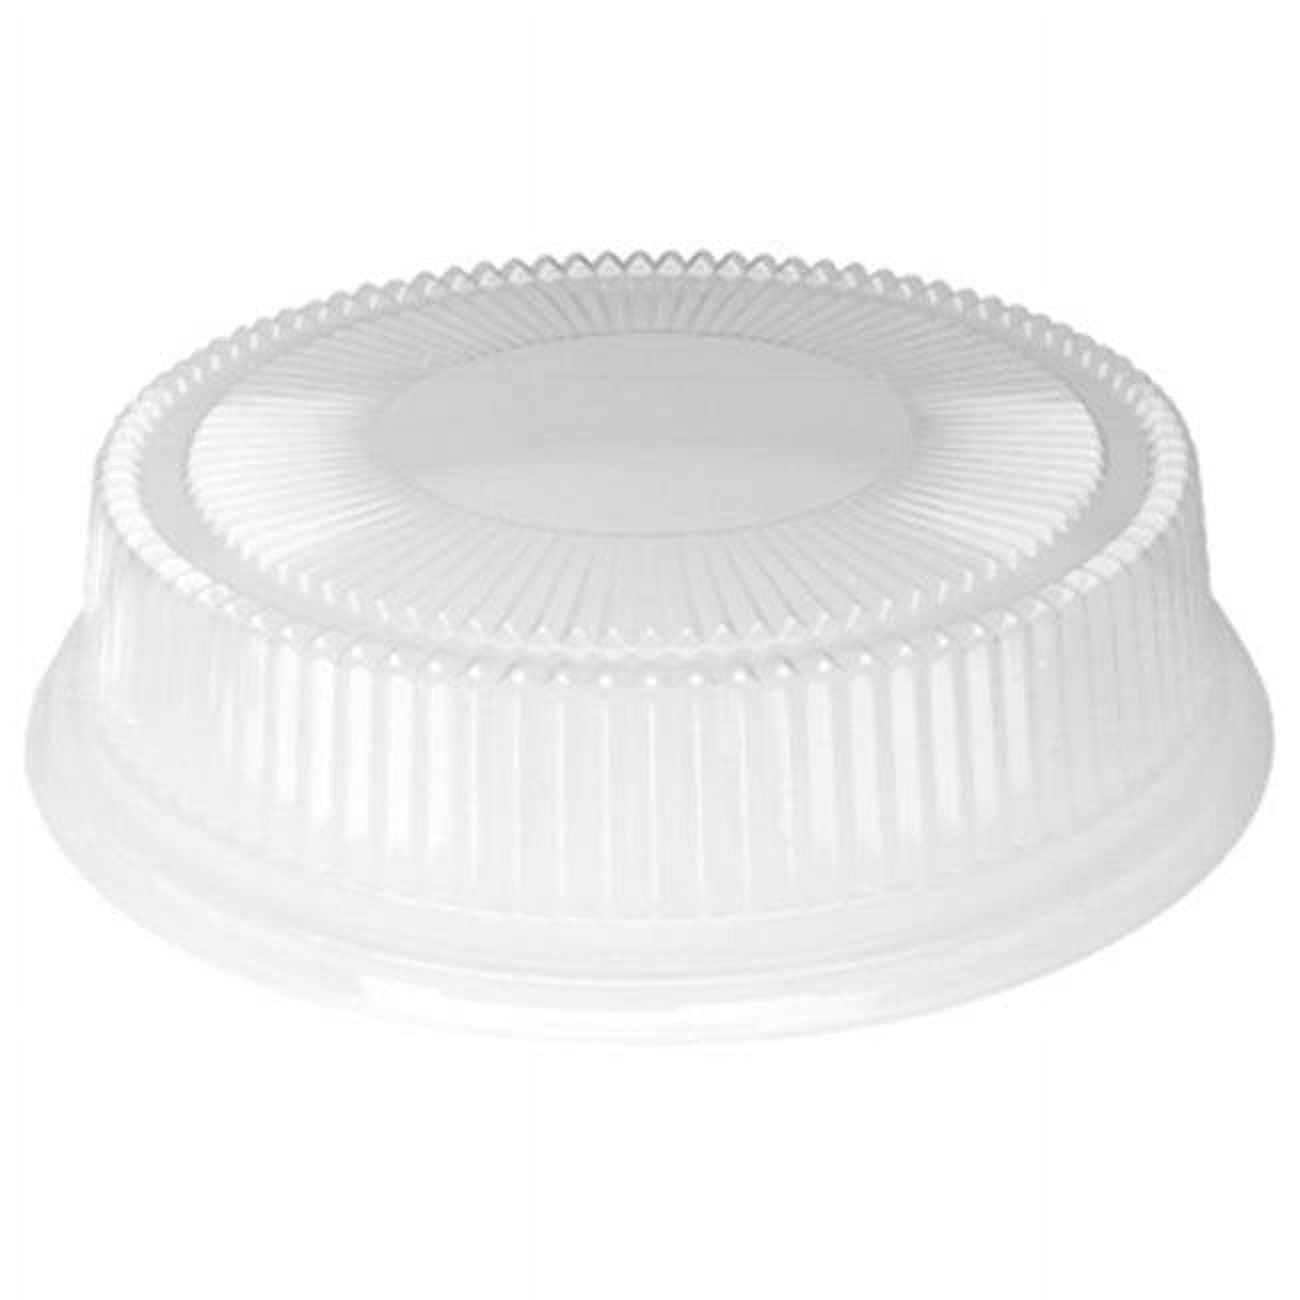 Lhp16stak Cpc 16 In. Stakmate Hi Dome Lid, Case Of 25